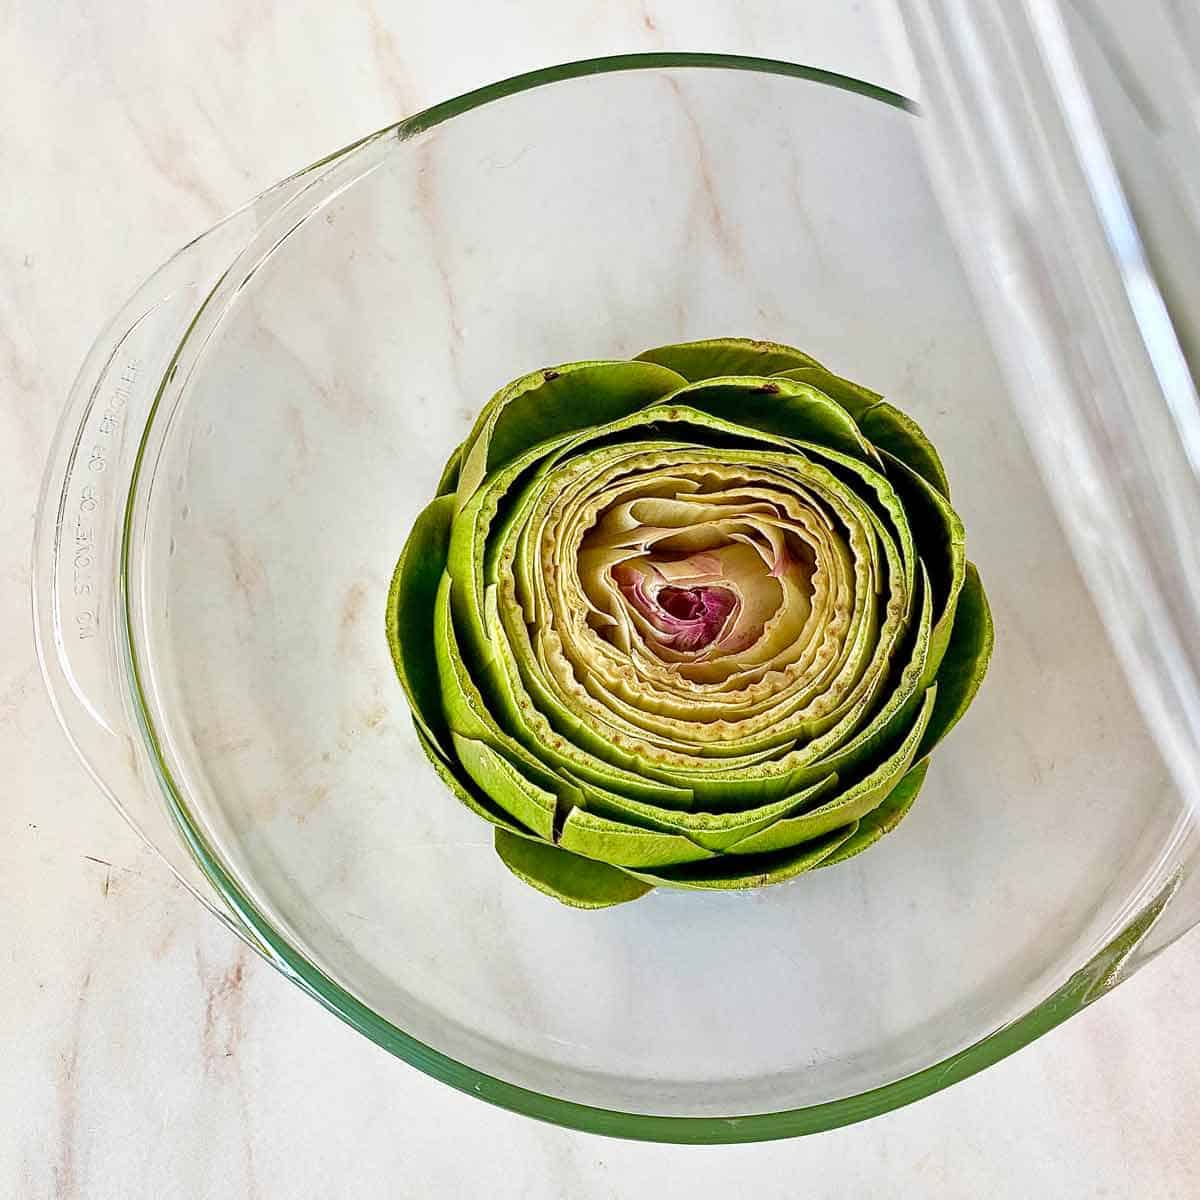 An artichoke in a microwave safe bowl ready for cooking.